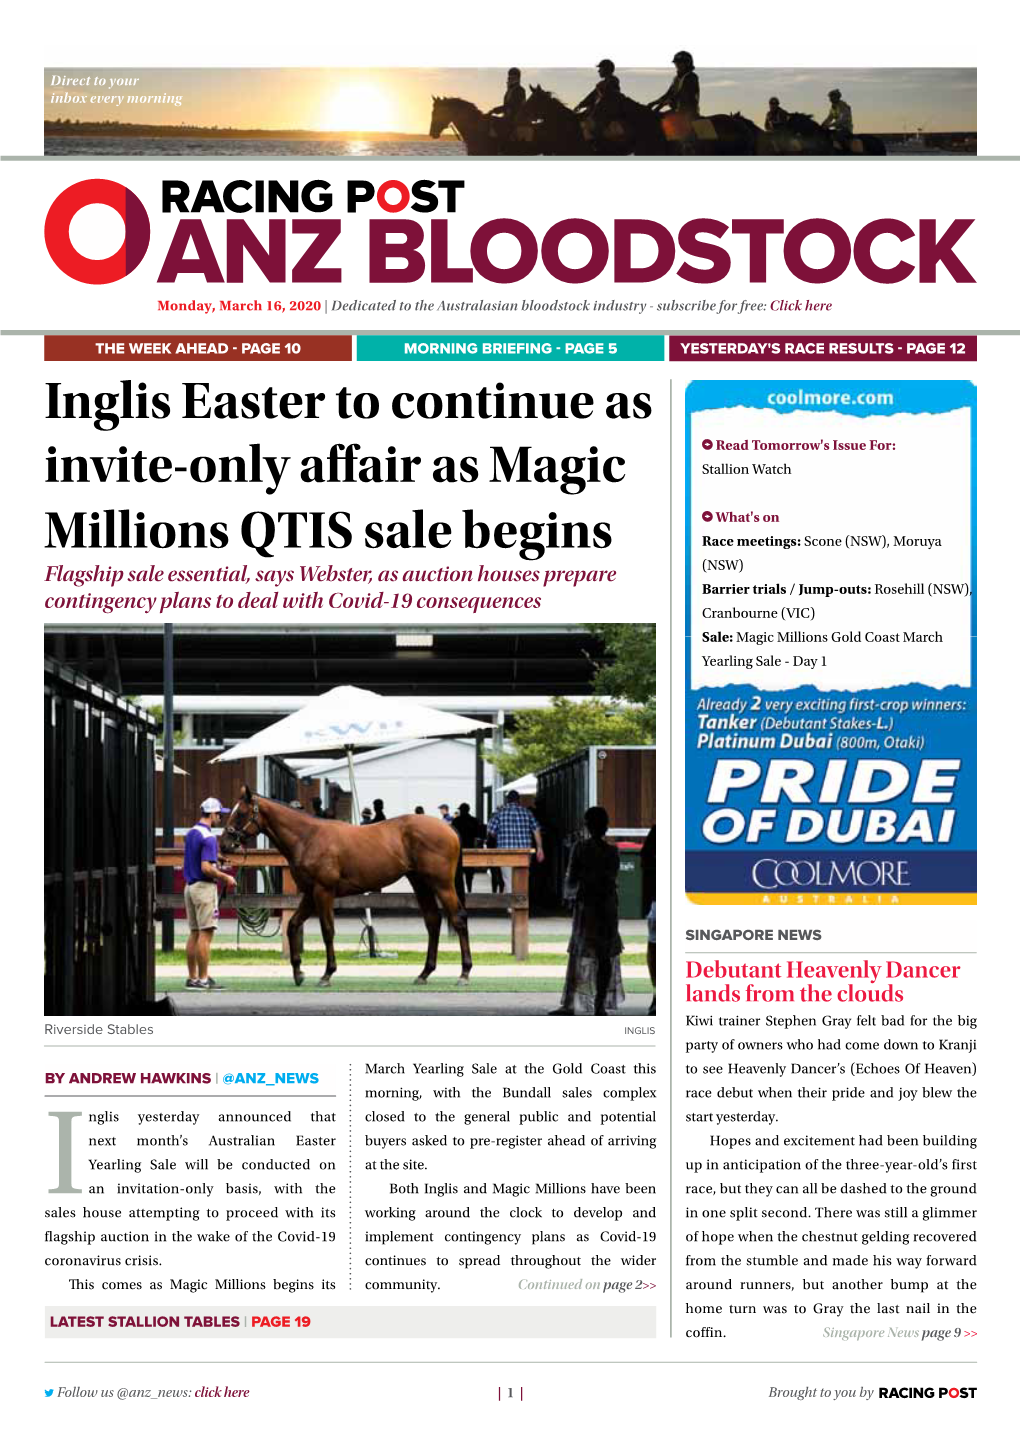 Inglis Easter to Continue As Invite-Only Affair As Magic Millions QTIS Sale Begins | 2 | Monday, March 16, 2020